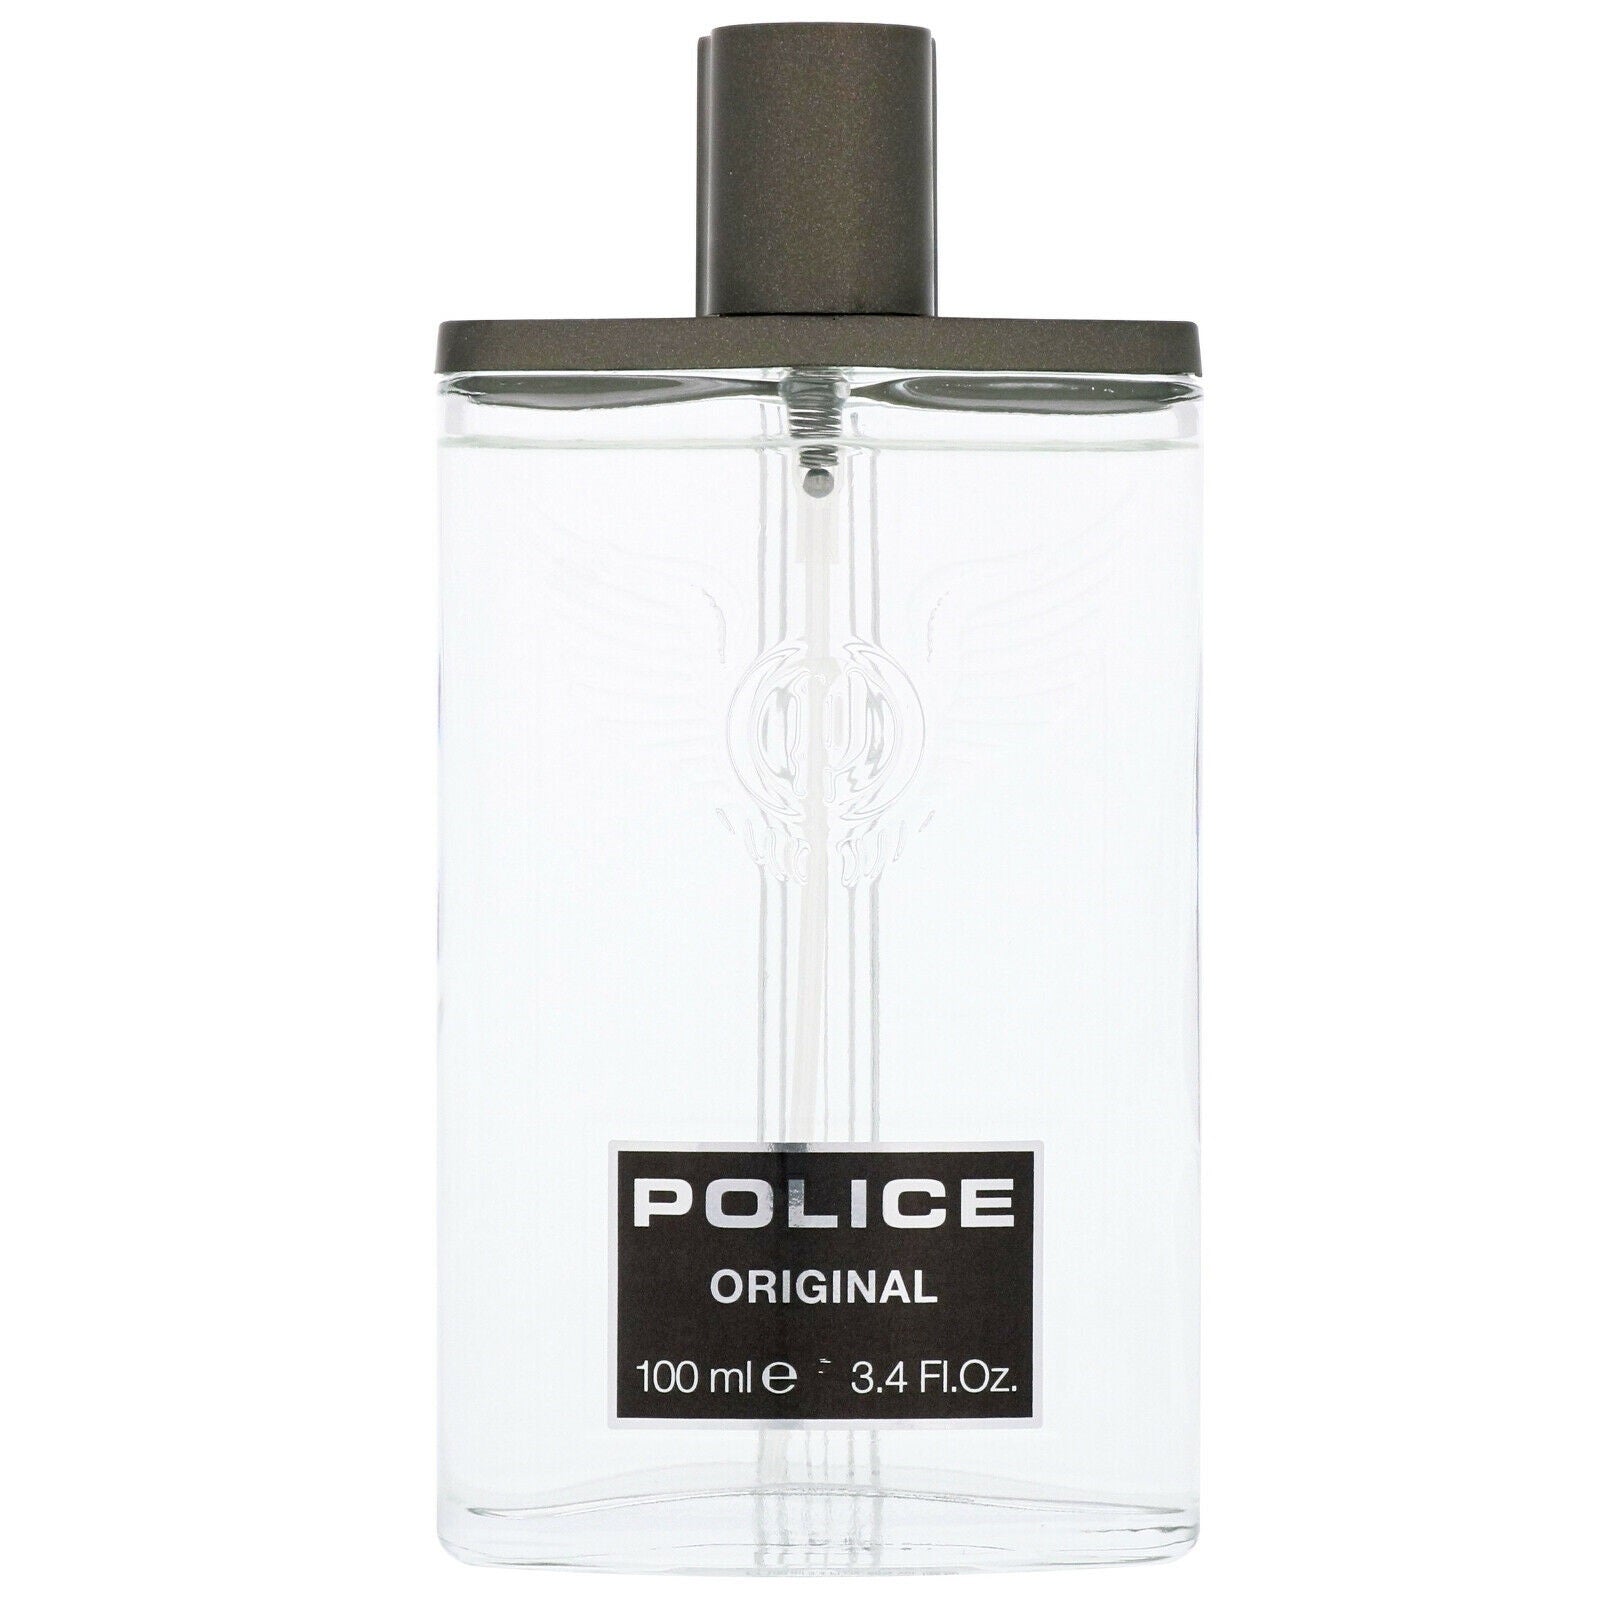 Police Original Aftershave Spray 100ml - Feel Gorgeous